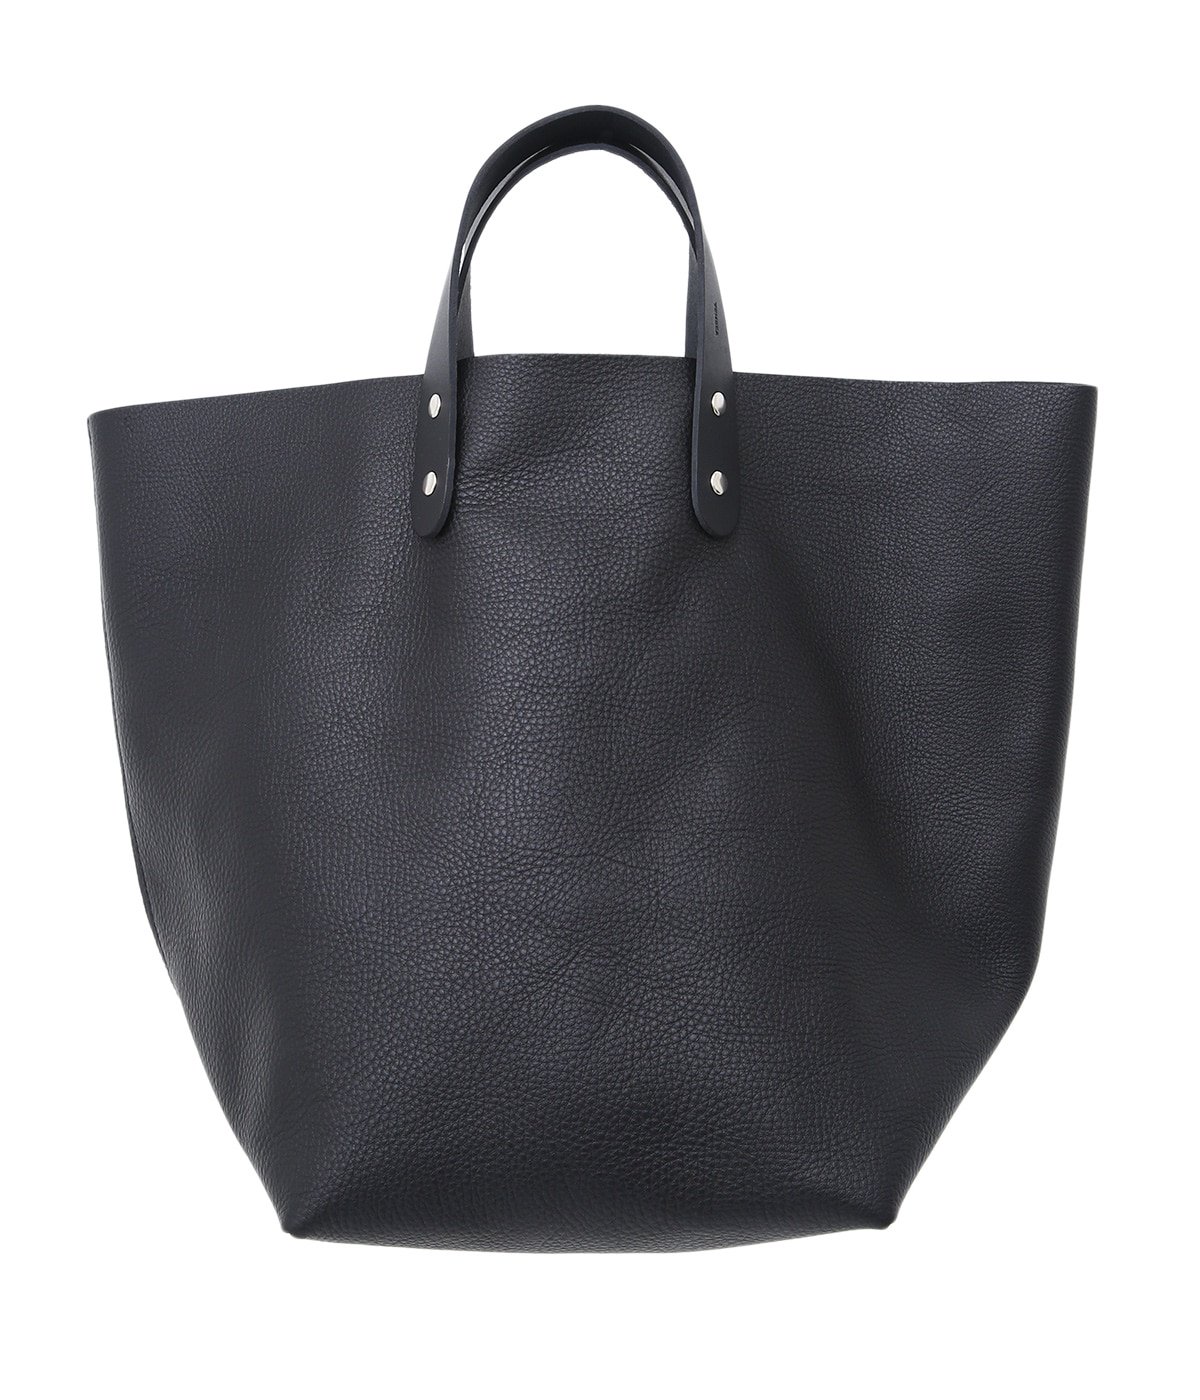 DELIVERY TOTE LEATHER | TEMBEA(テンベア) / バッグ トートバッグ (メンズ レディース)の通販 -  ARKnets(アークネッツ) 公式通販 【正規取扱店】